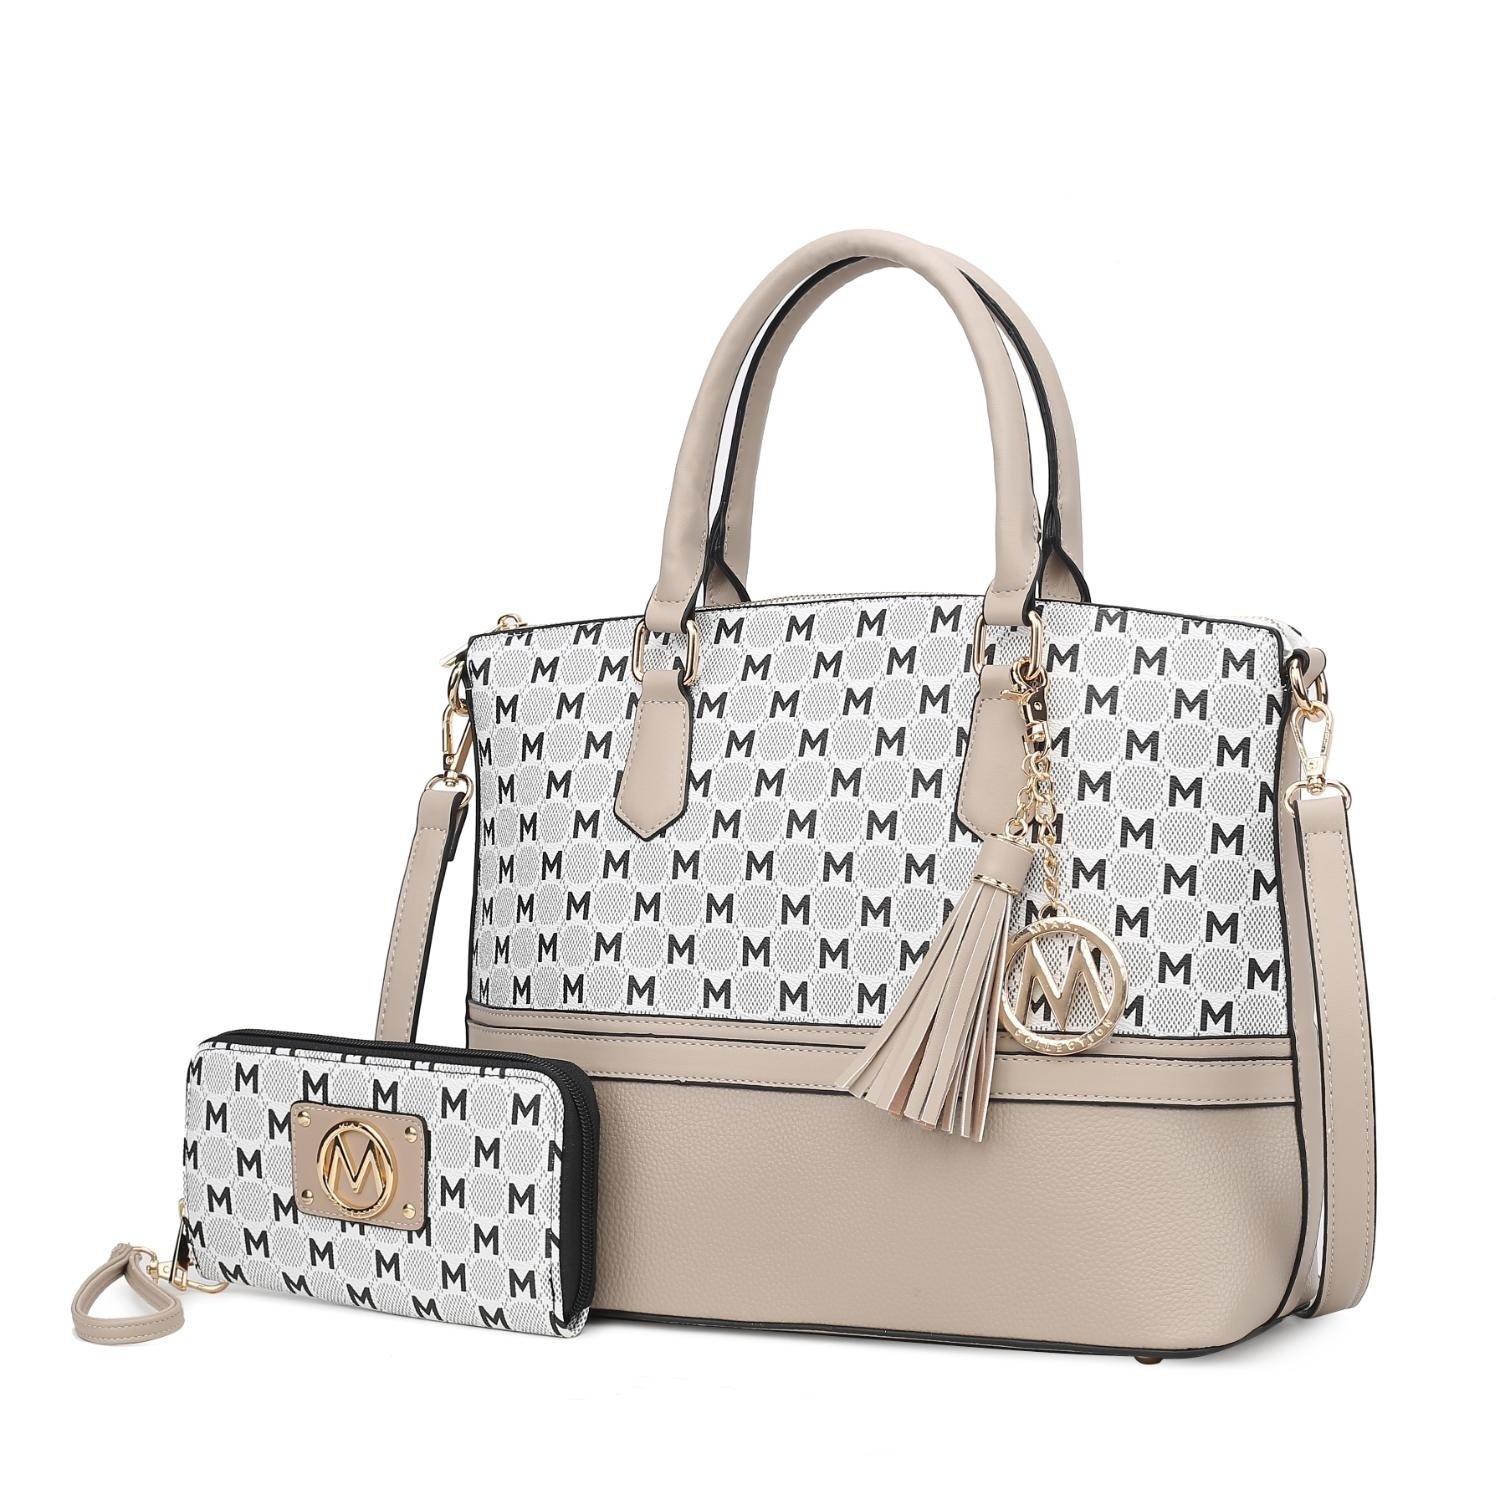 MKF Collection Saylor Circular M Emblem Print Women's Tote Bag With Matching Wristlet Wallet 2 Pieces By Mia K - Taupe